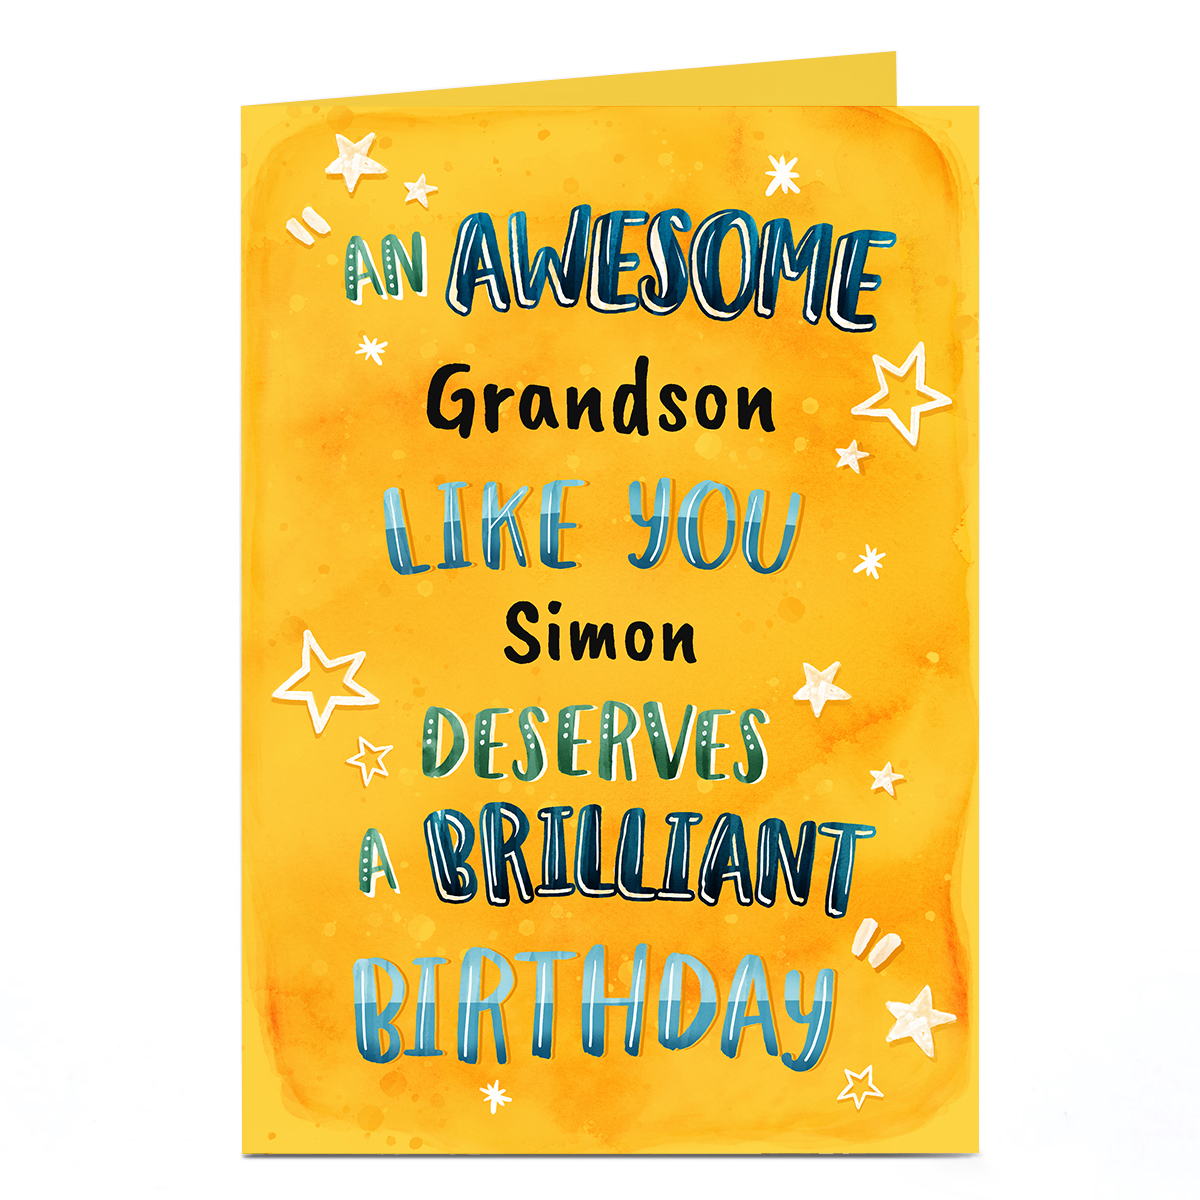 Buy Personalised Birthday Card - Awesome Like You for GBP 1.79 | Card ...